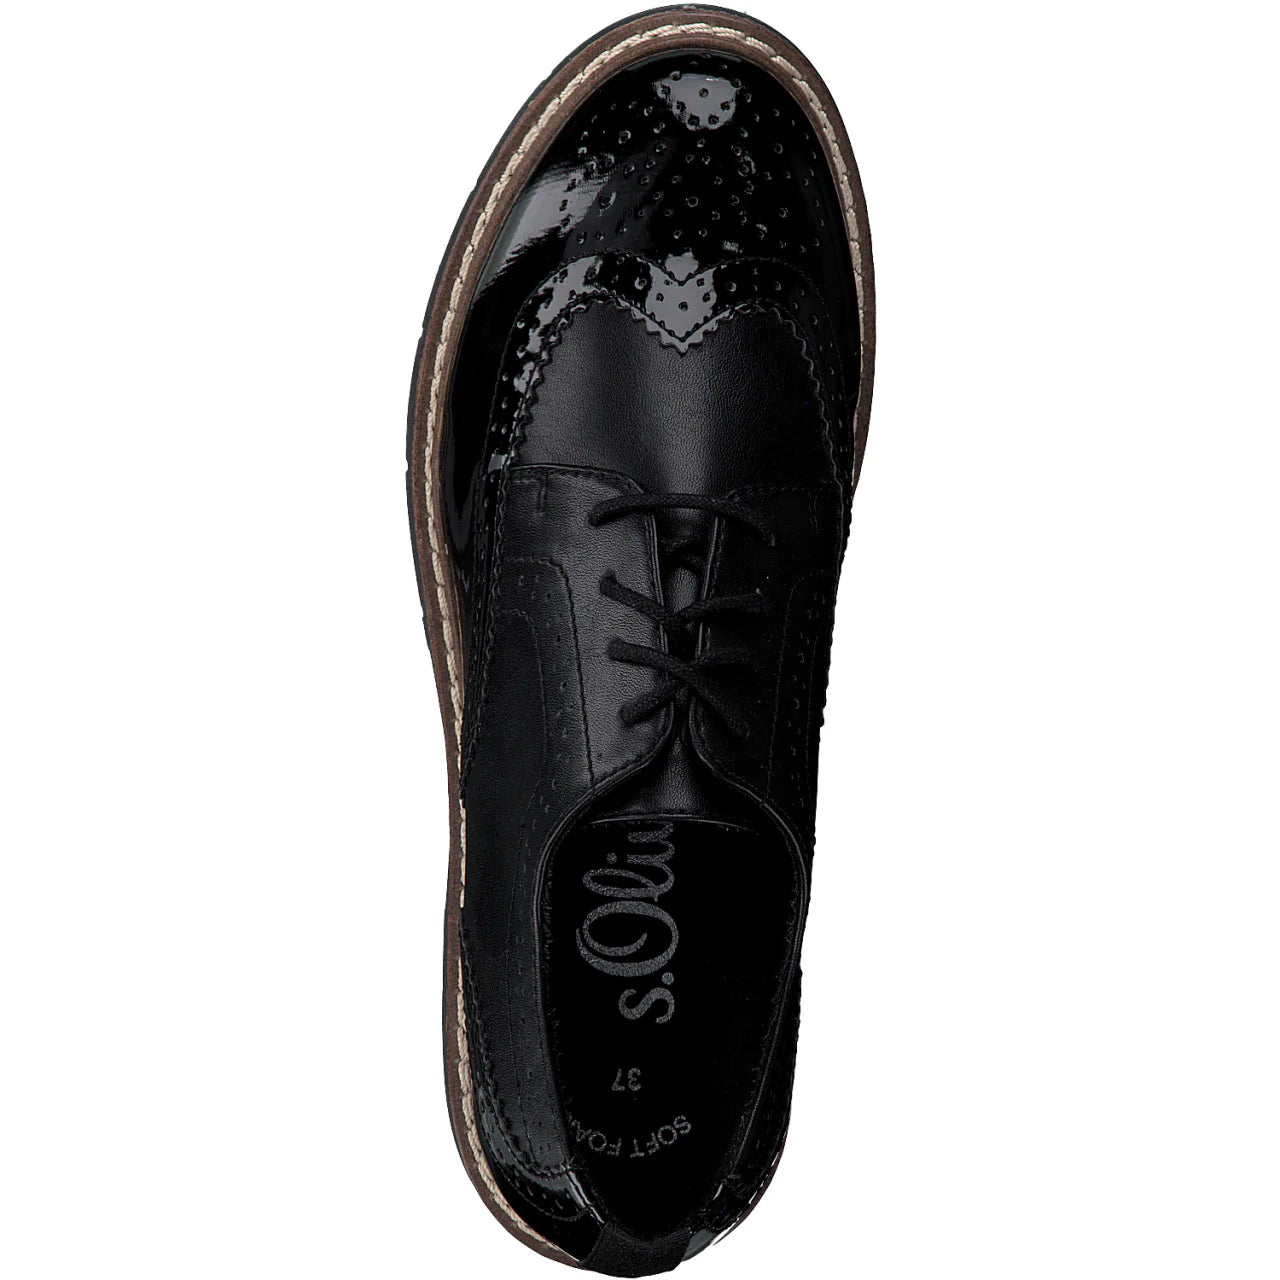 S.OLIVER CONTRAST LEATHER BROGUES IN BLACK